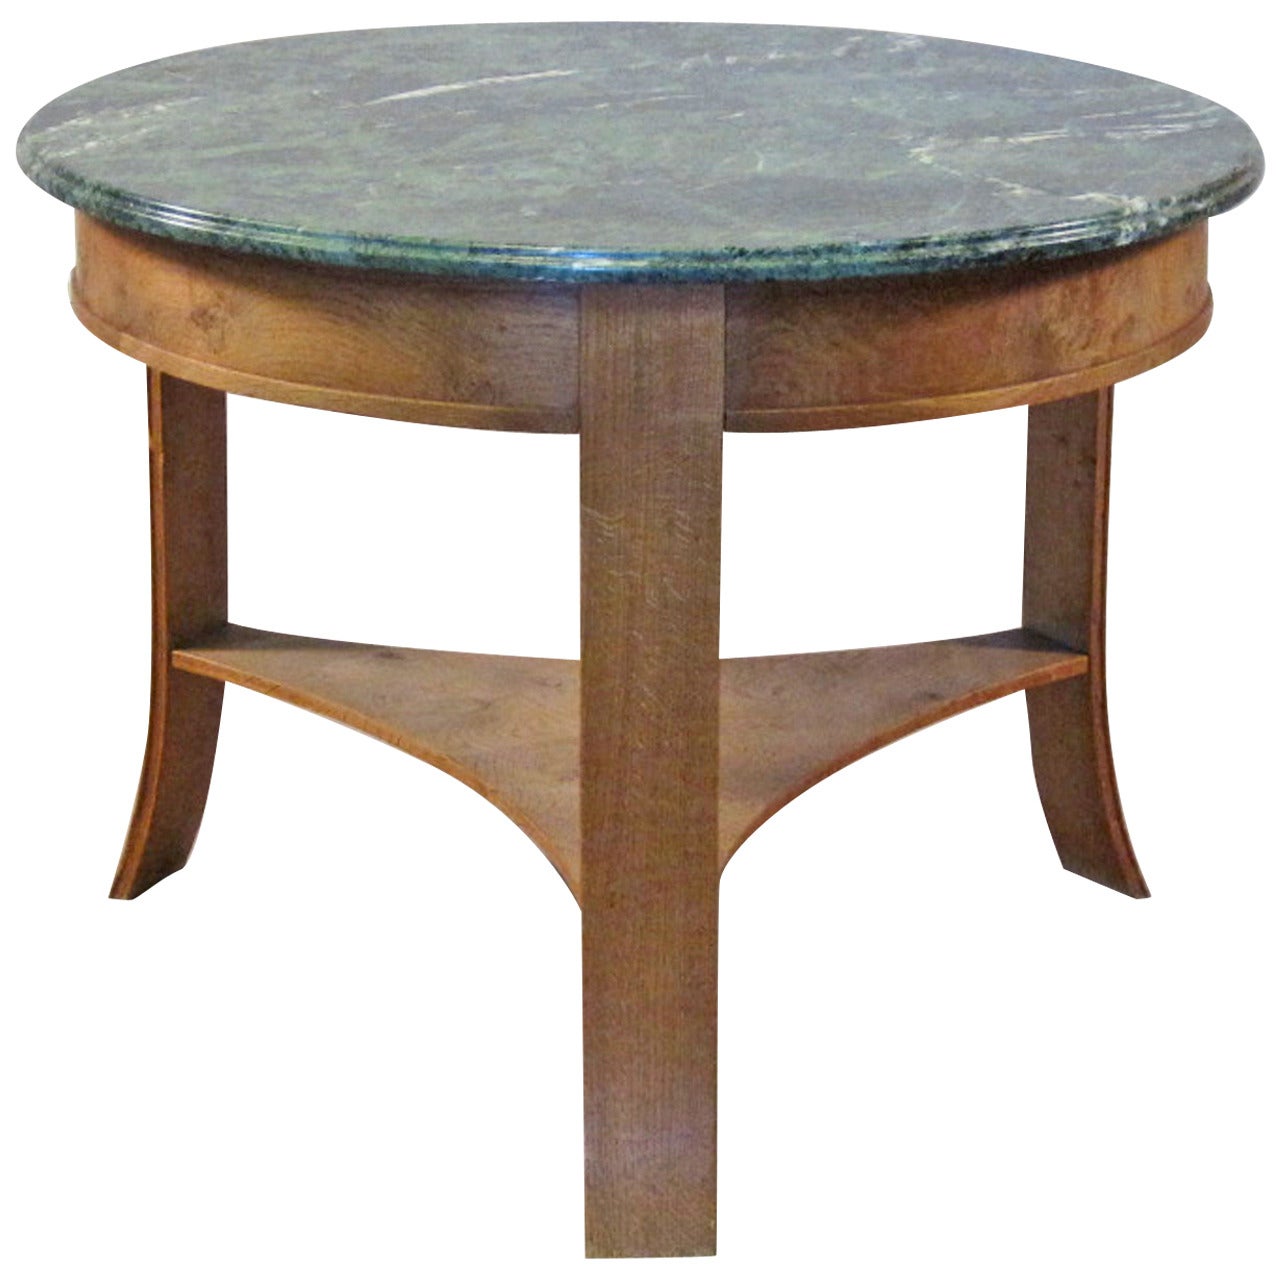 1940s-1950s Circular Oak Center Table with Green Marble Top